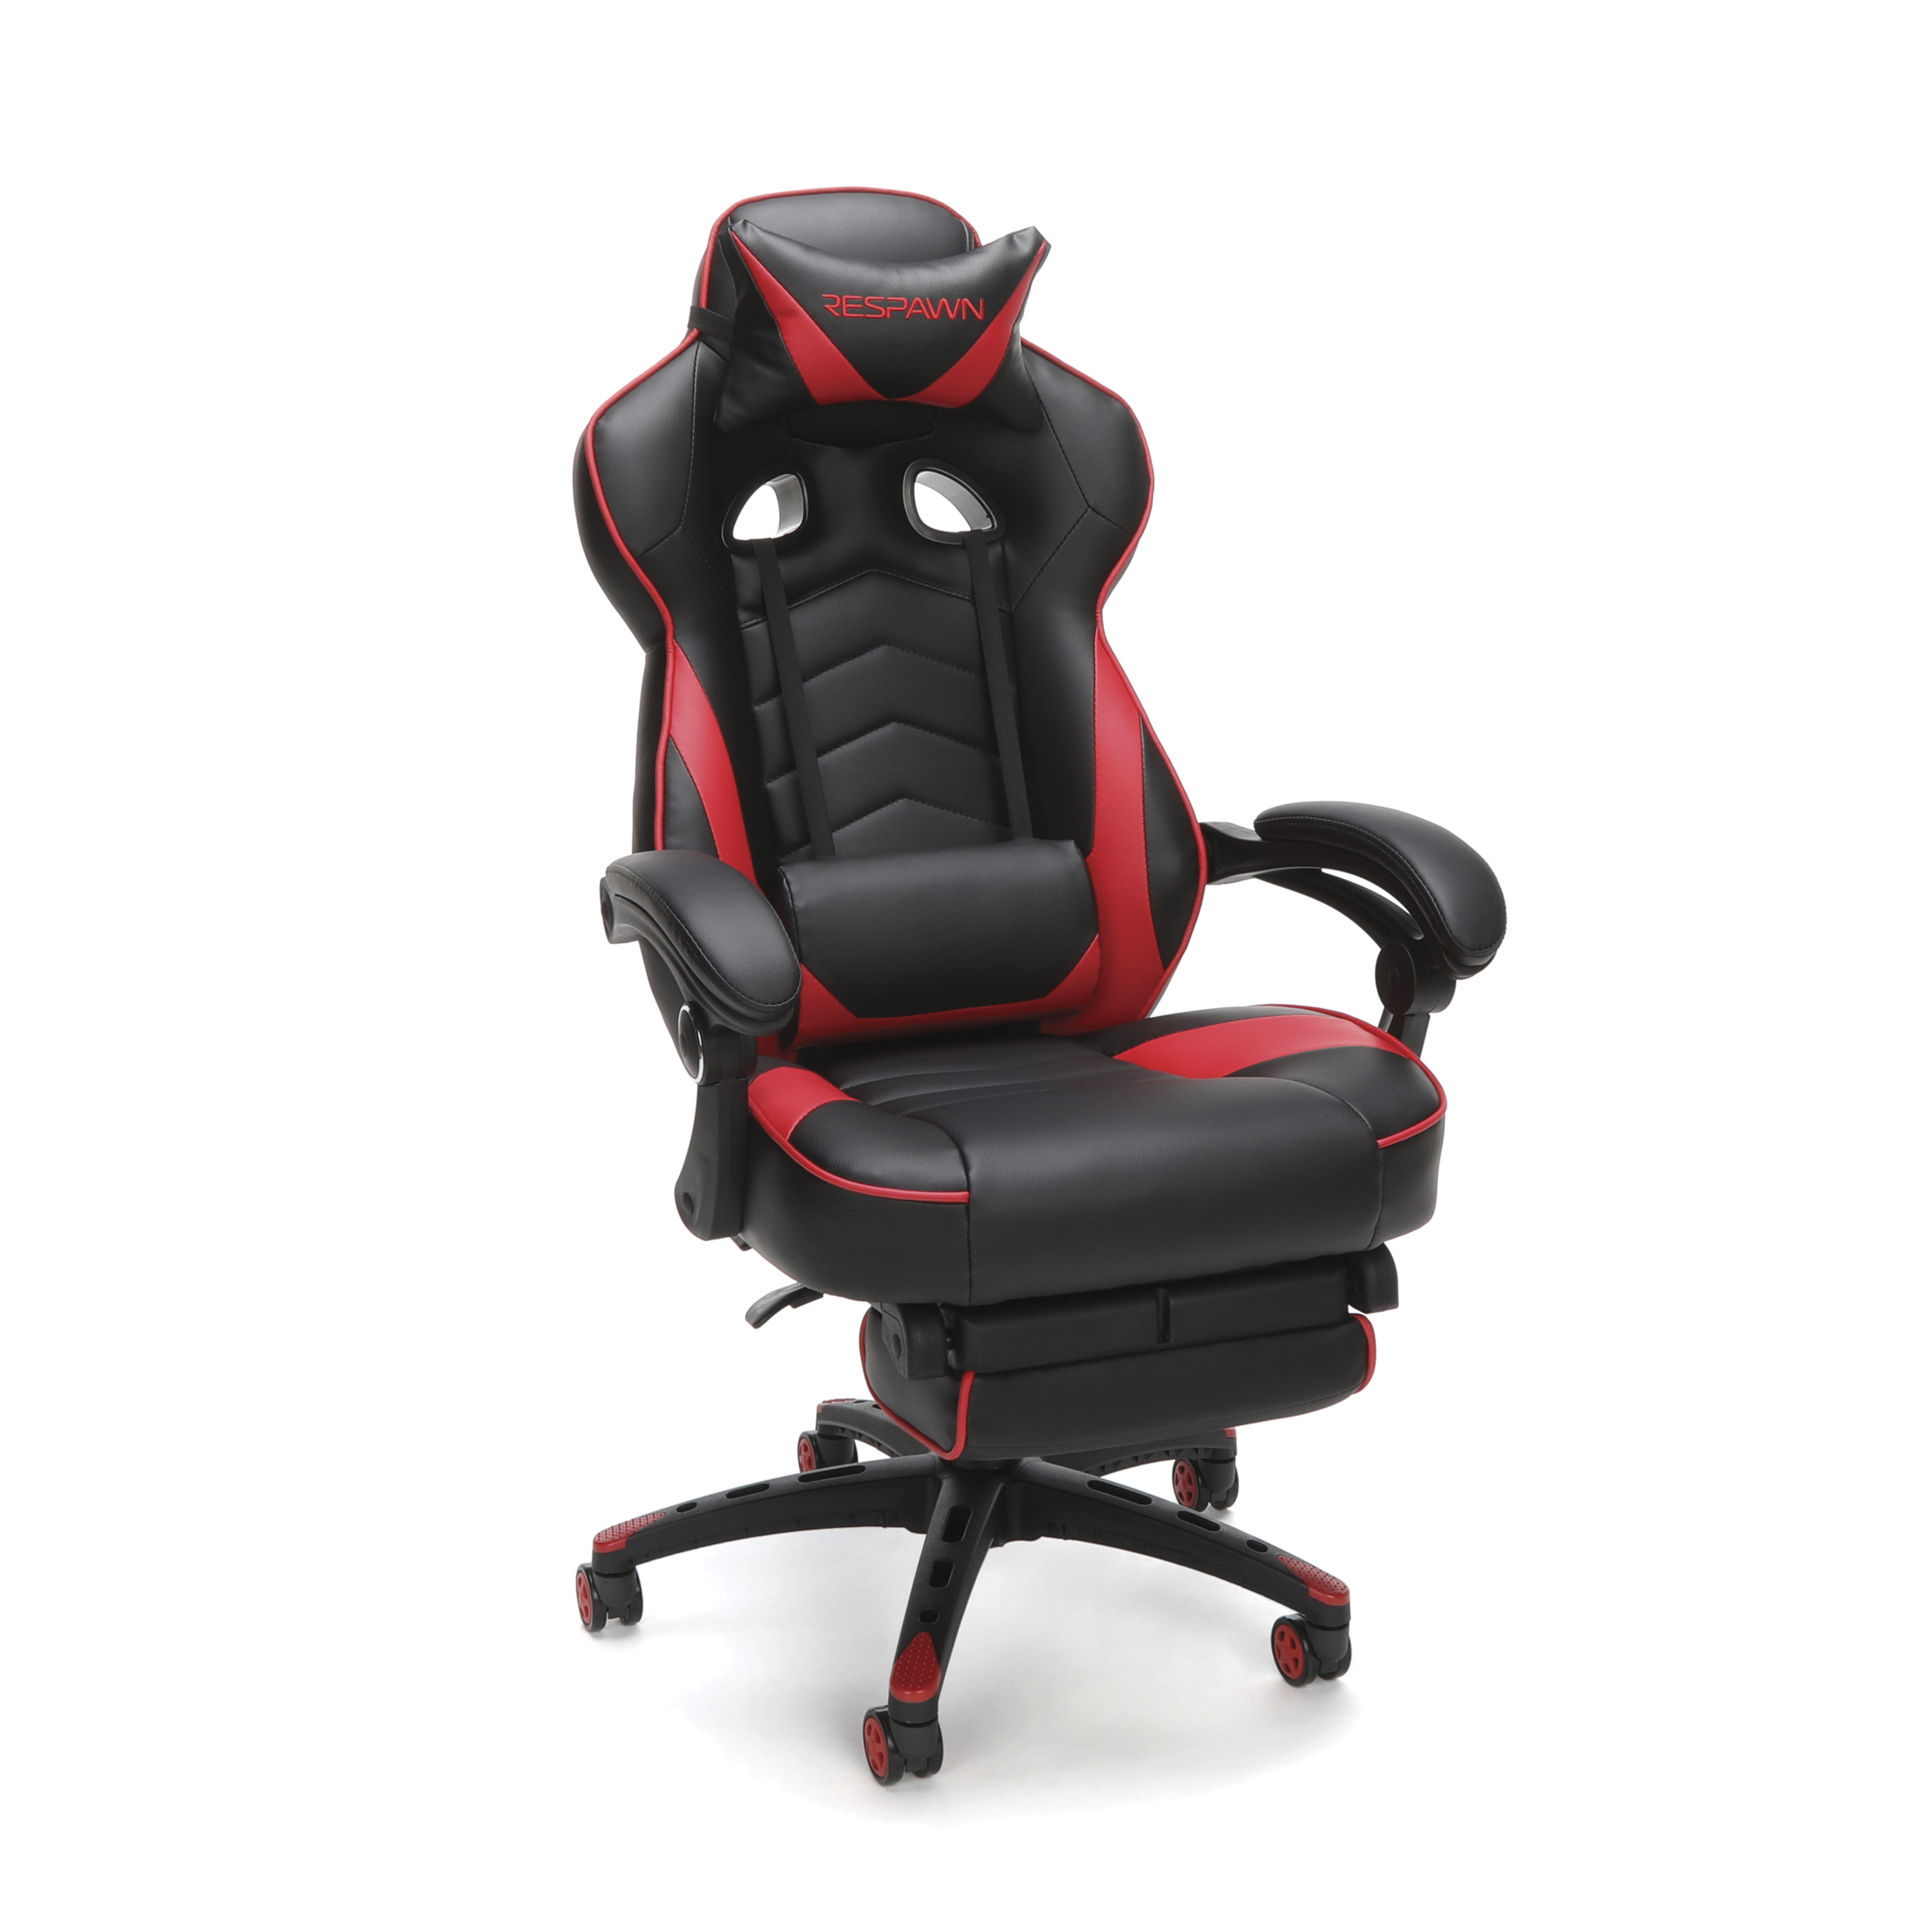 RESPAWN 110 Racing Style Recliner Leather Gaming Chair with Footrest